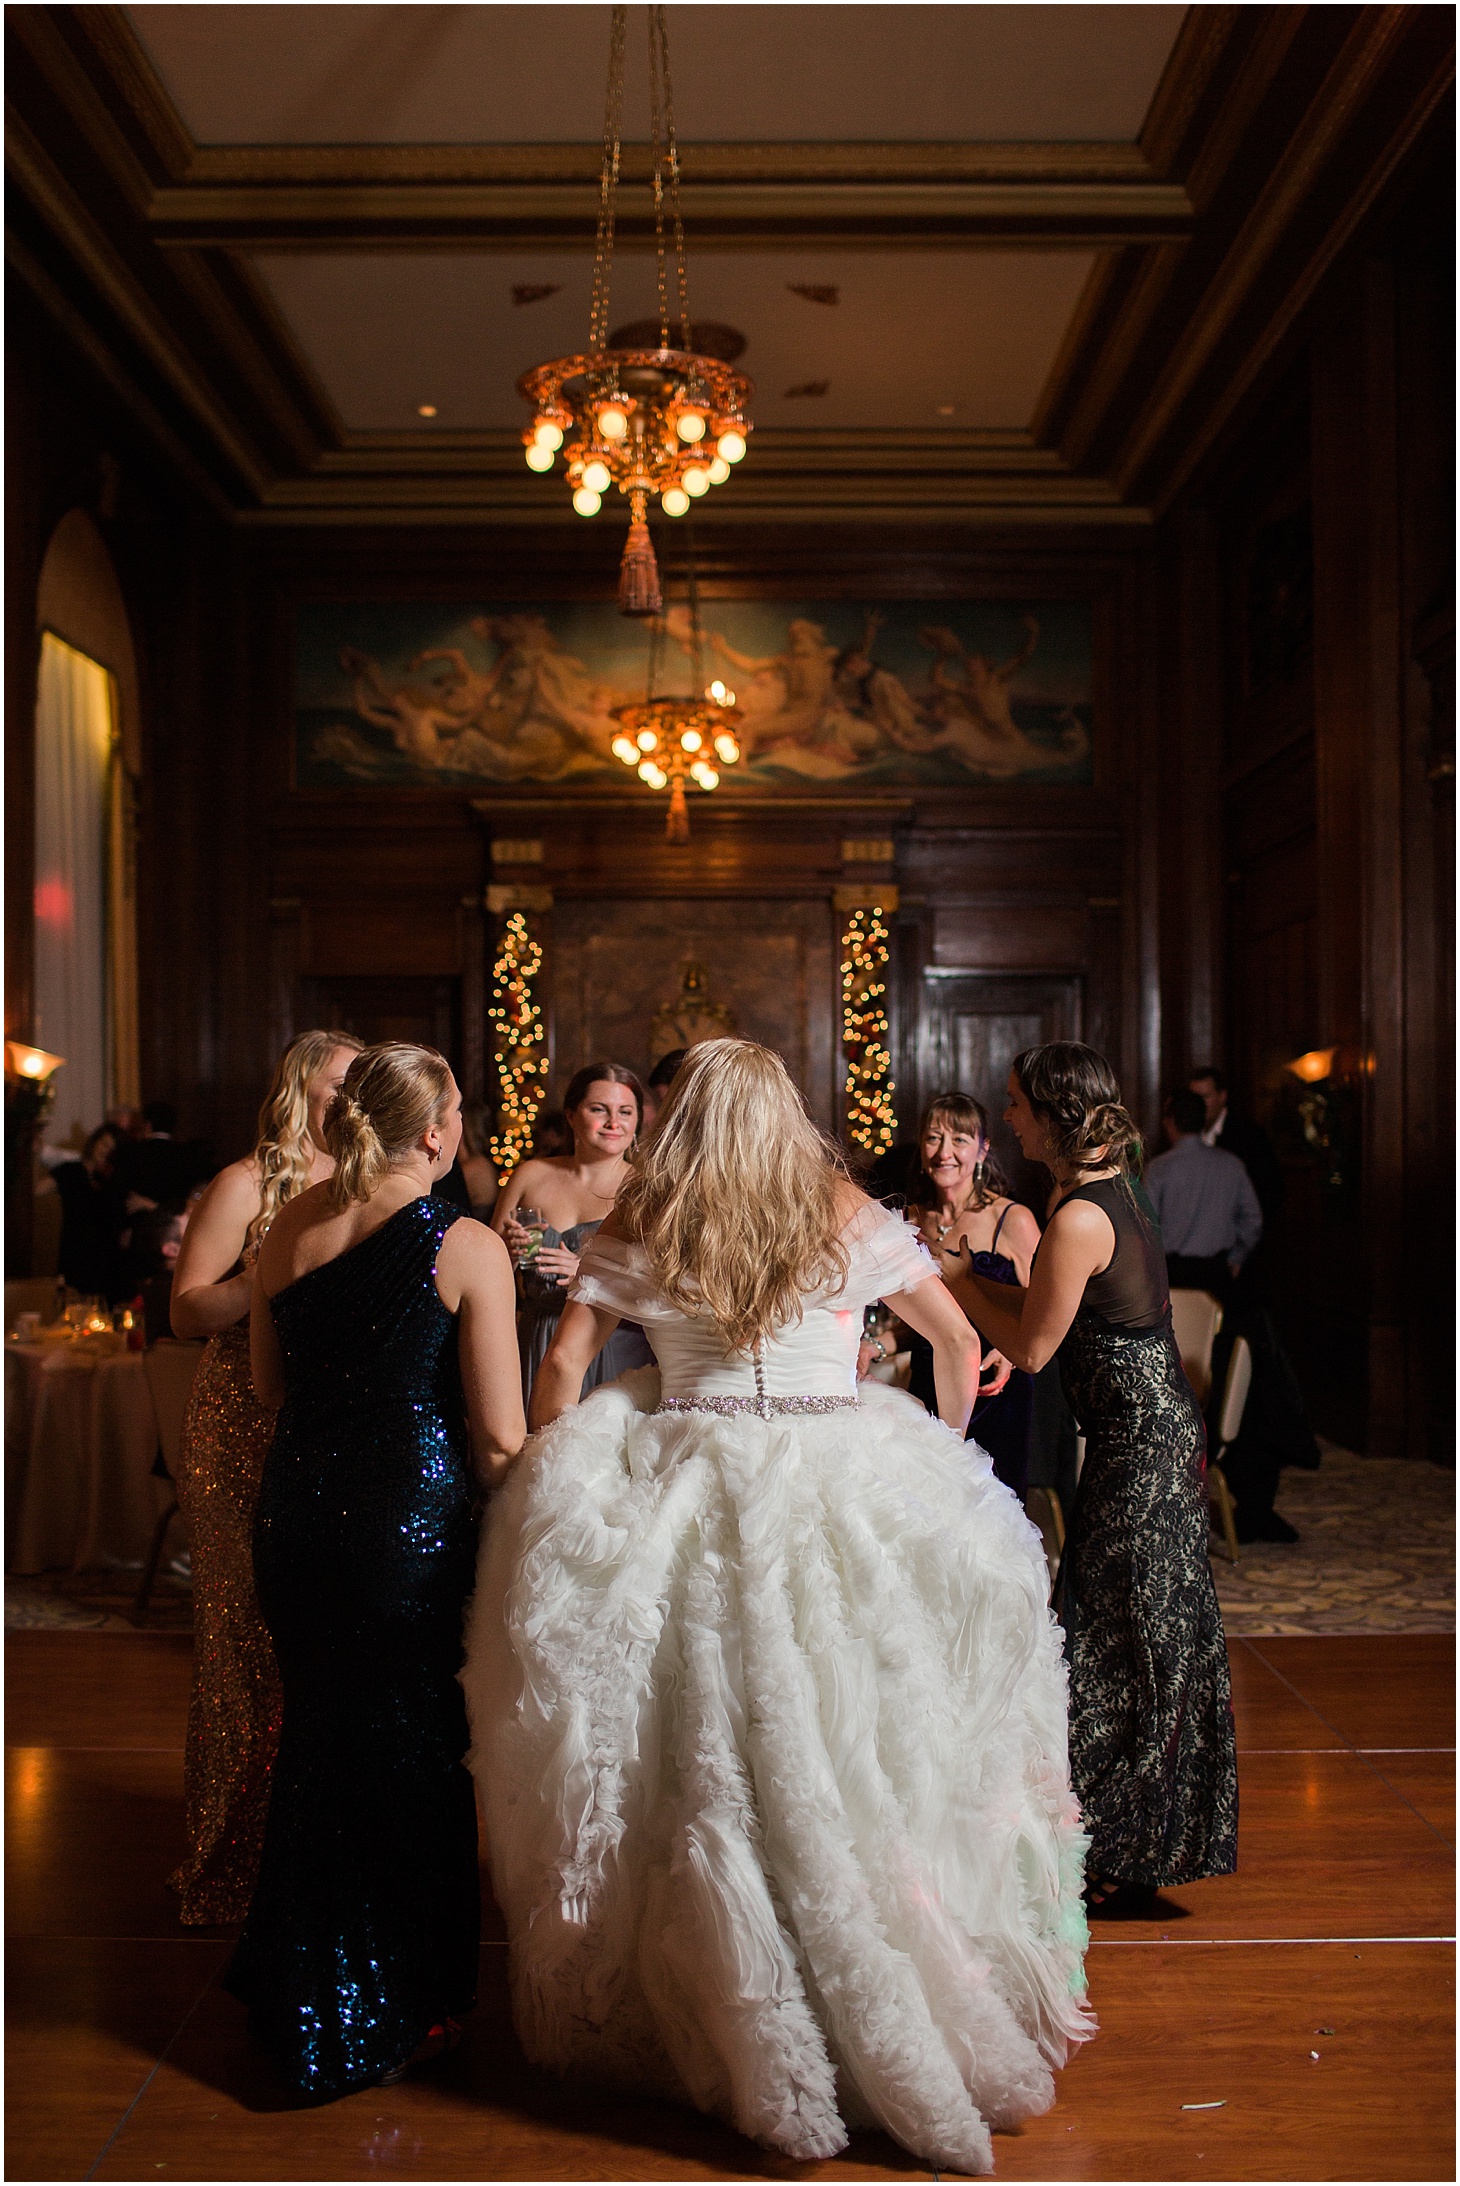 Wedding Reception at the Army and Navy Club | Luxe Winter Wedding in Washington, DC | Sarah Bradshaw Photography | Washington DC Wedding Photographer